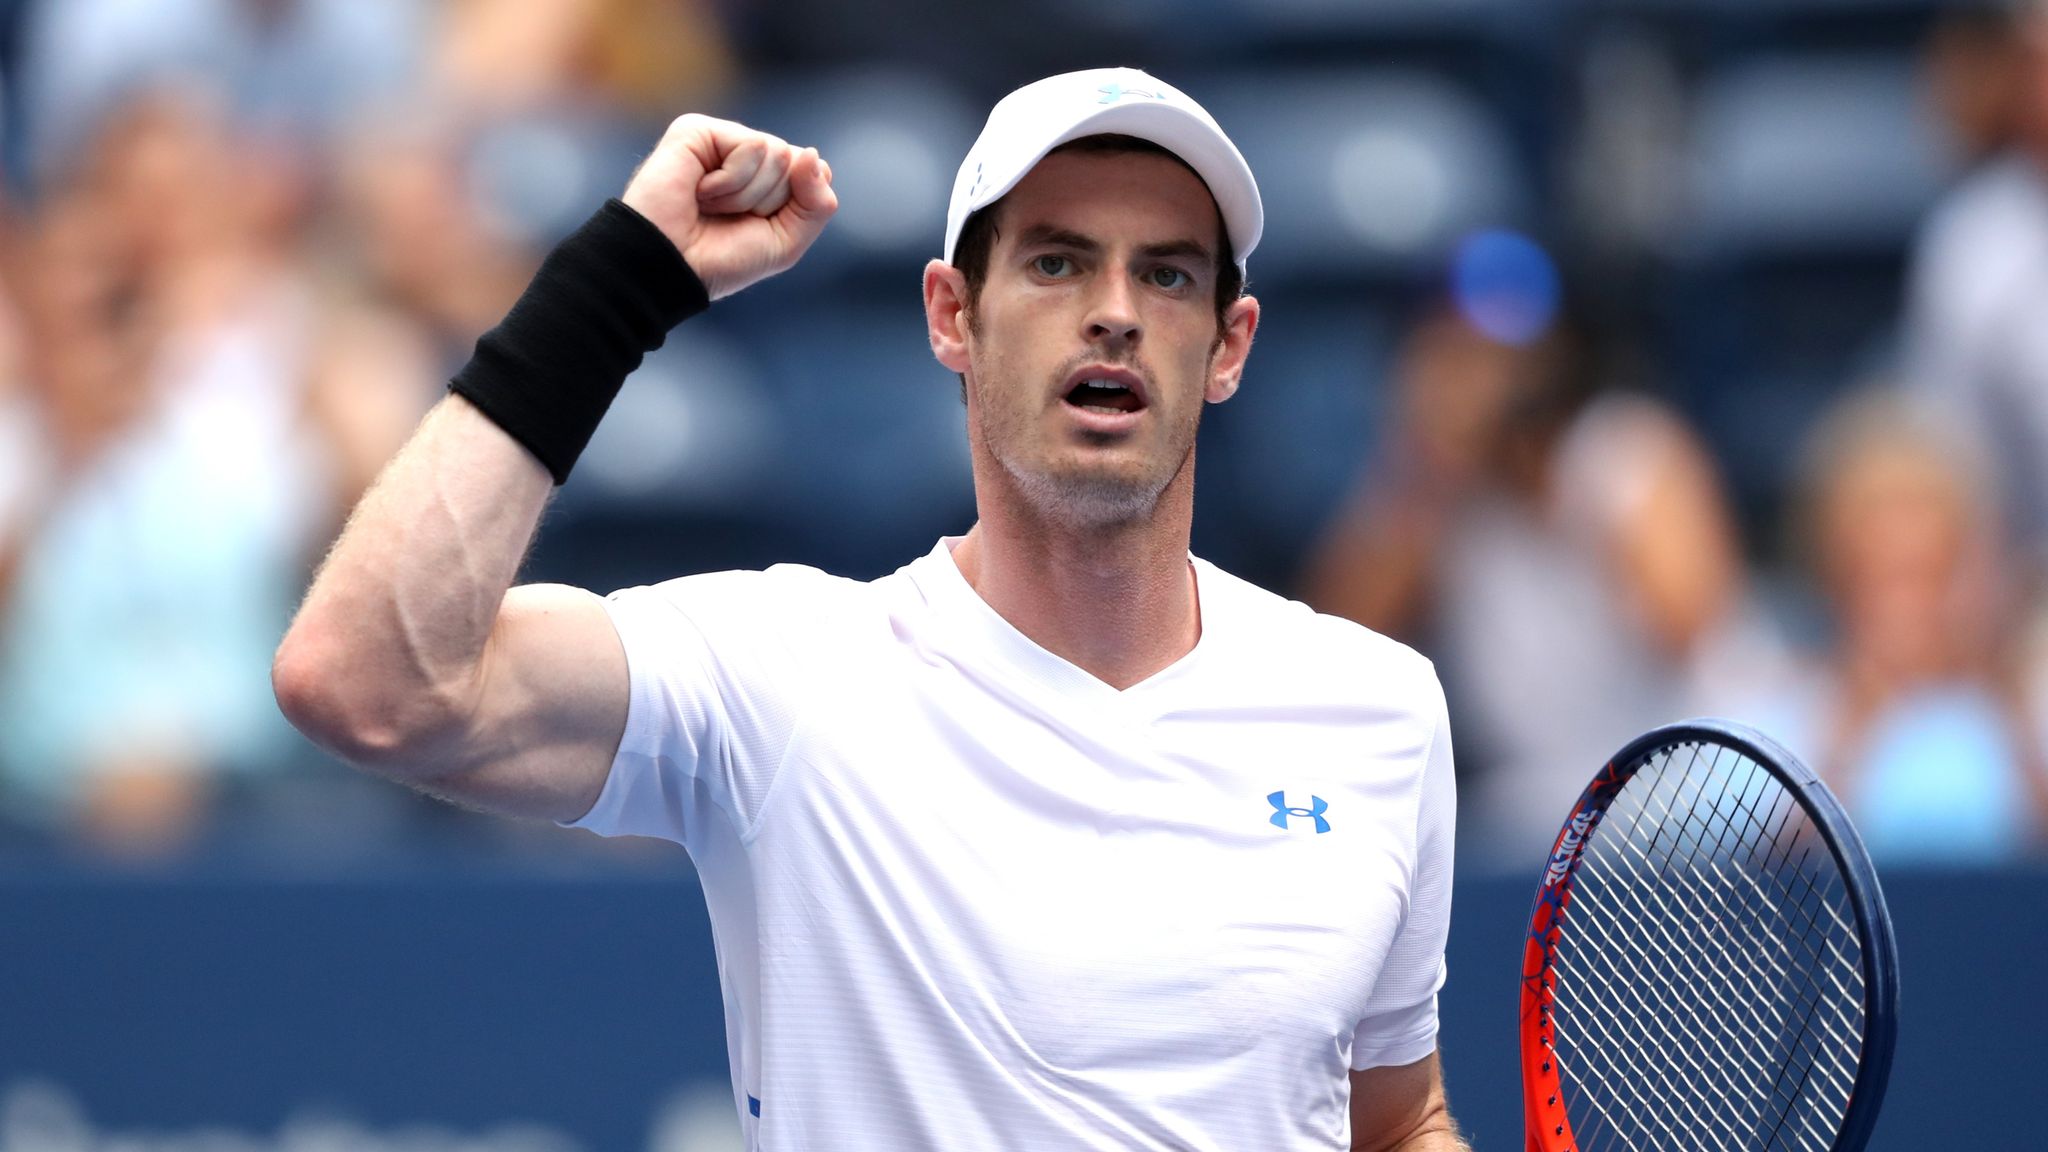 Andy Murray Receives Us Open Wild Card For Grand Slam At End Of August Tennis News Sky Sports